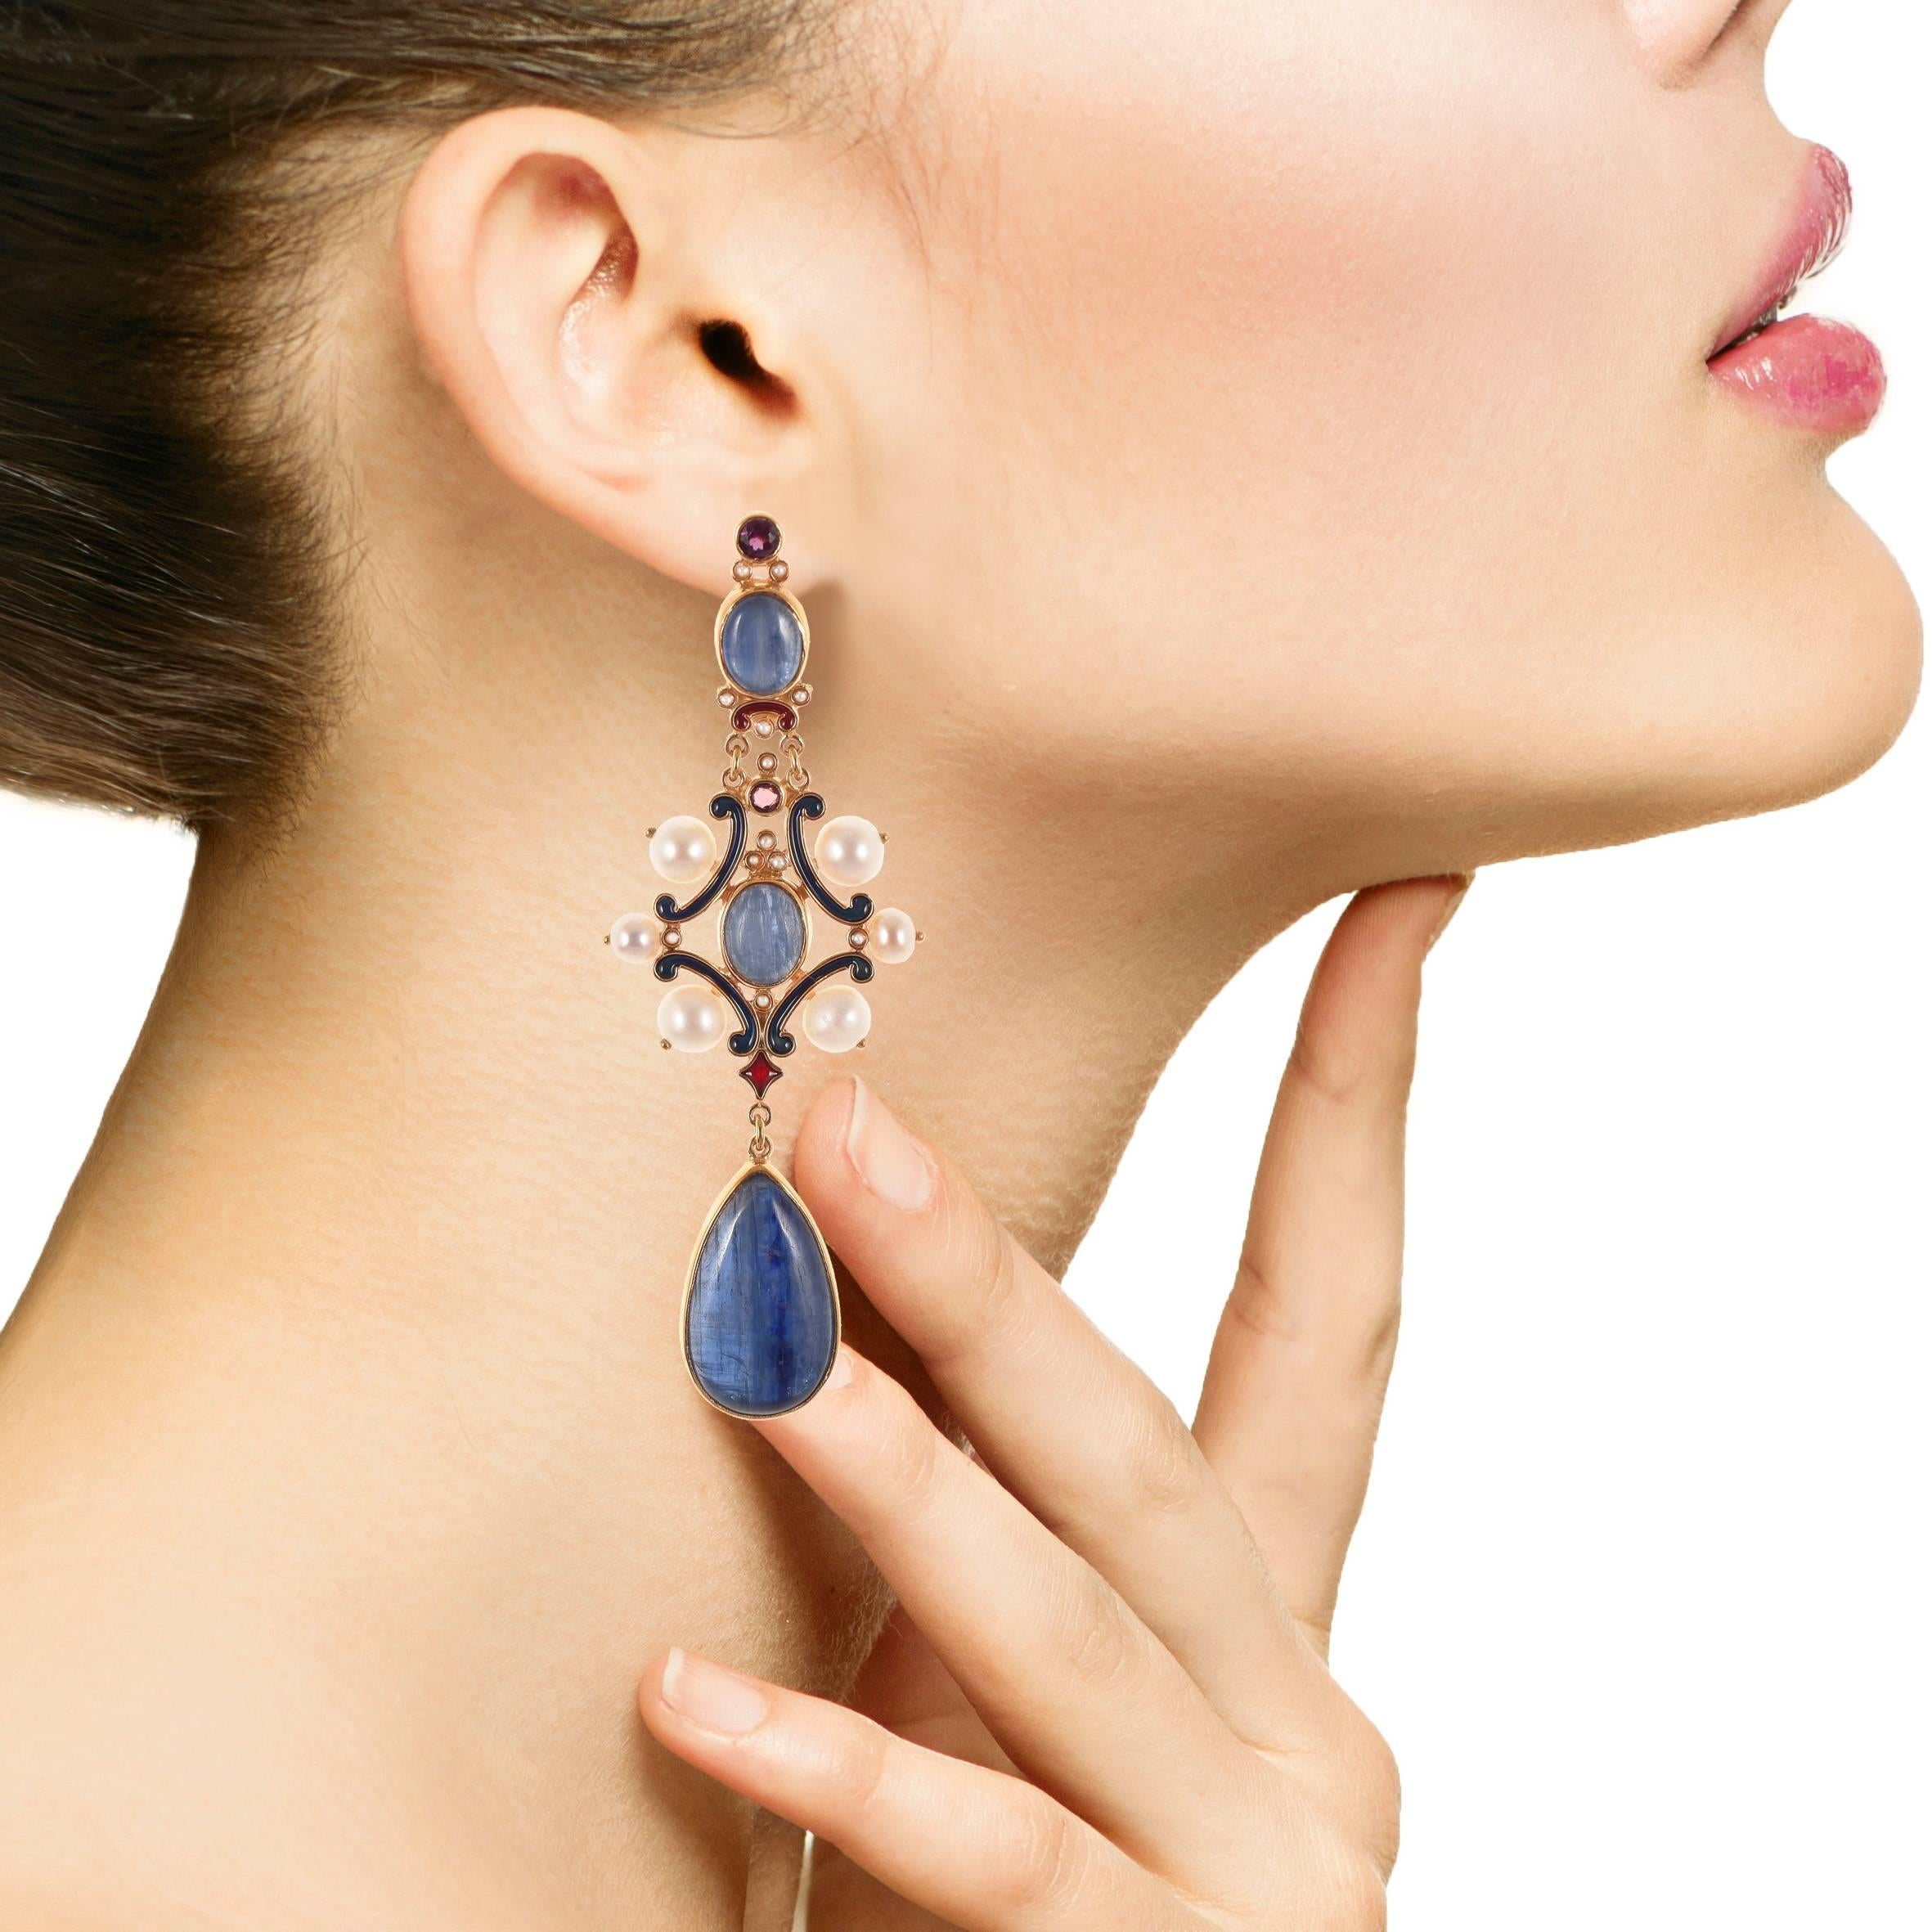 The earrings are handmade, gold-plated with precious stones: Rodalite, kyanite, micropearls. 
Pierced earrings. 

They are designed by Diego Percossi Papi and manufactured in his laboratory in Rome.